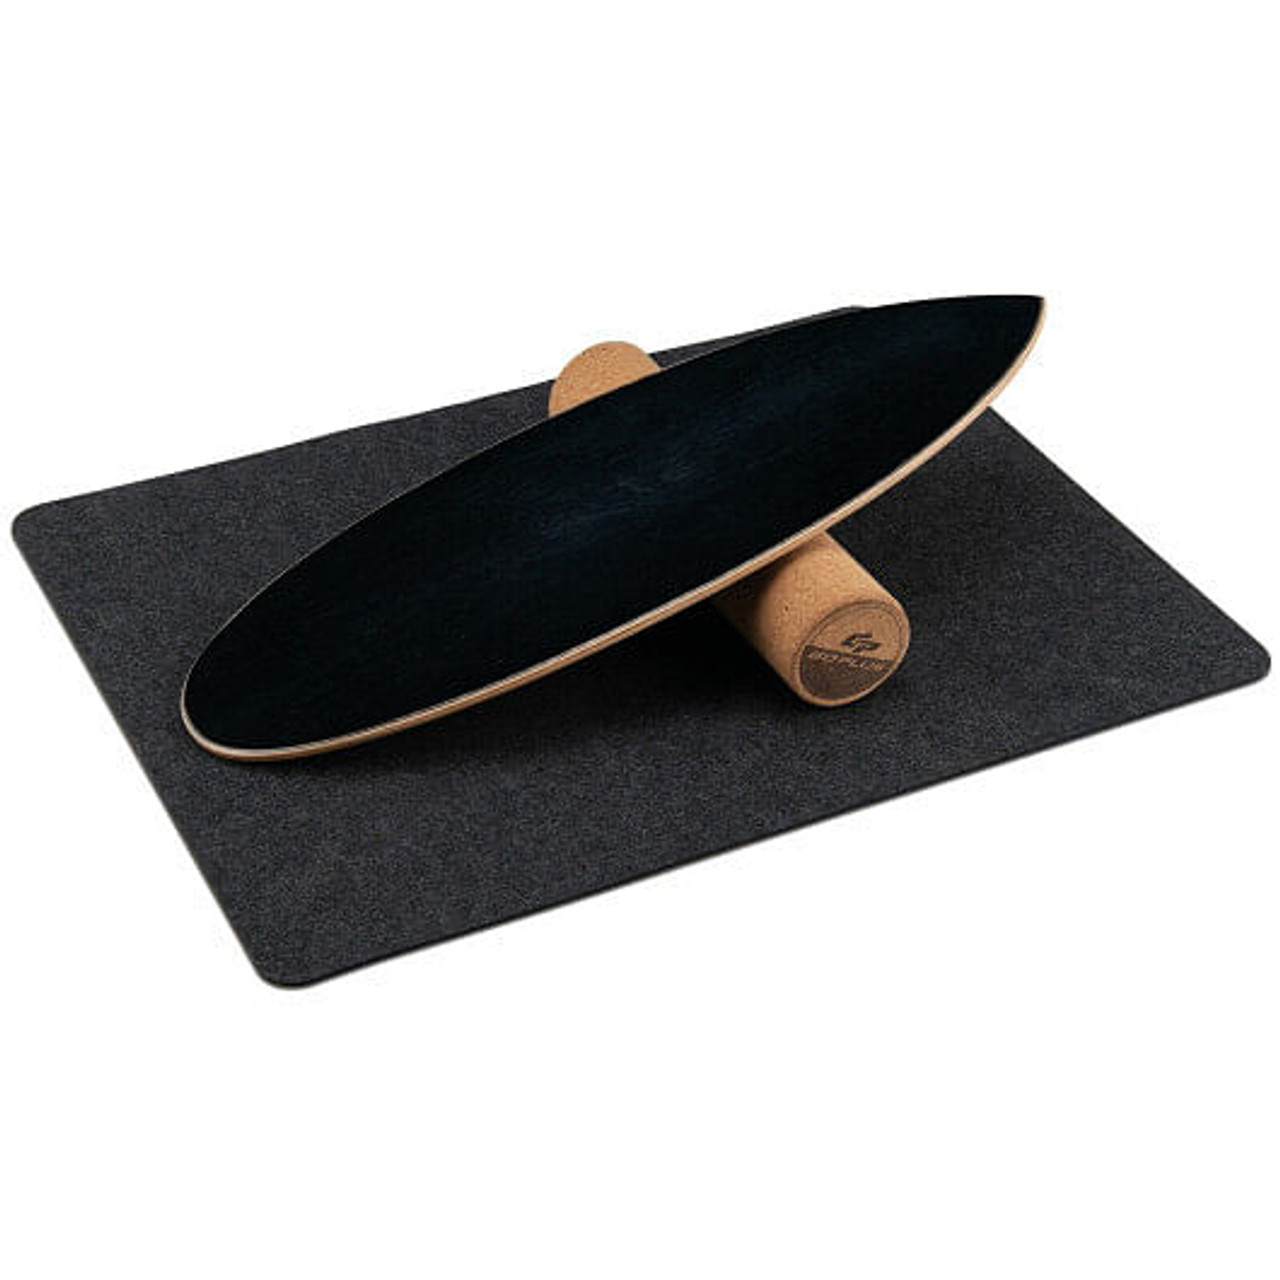 Balance Board Trainer for Core Strength-Black